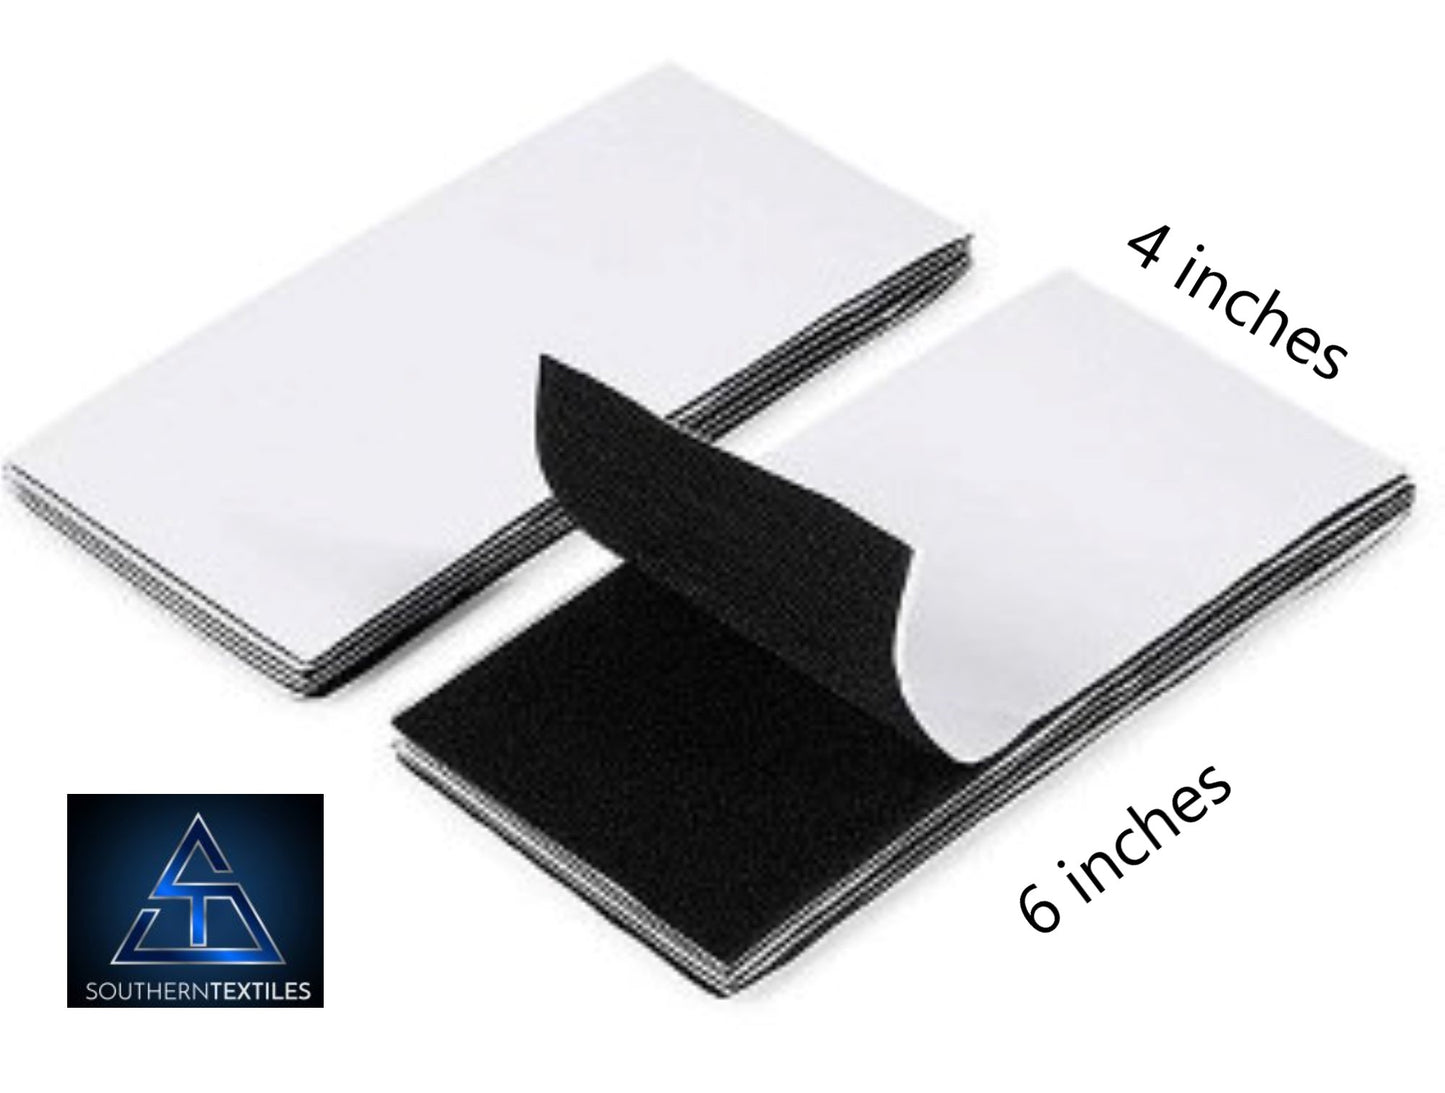 4x6-inch Rectangle Hook and/or Loop Tape Double-Sided Self-Adhesive Mounting Commercial Grade velrco